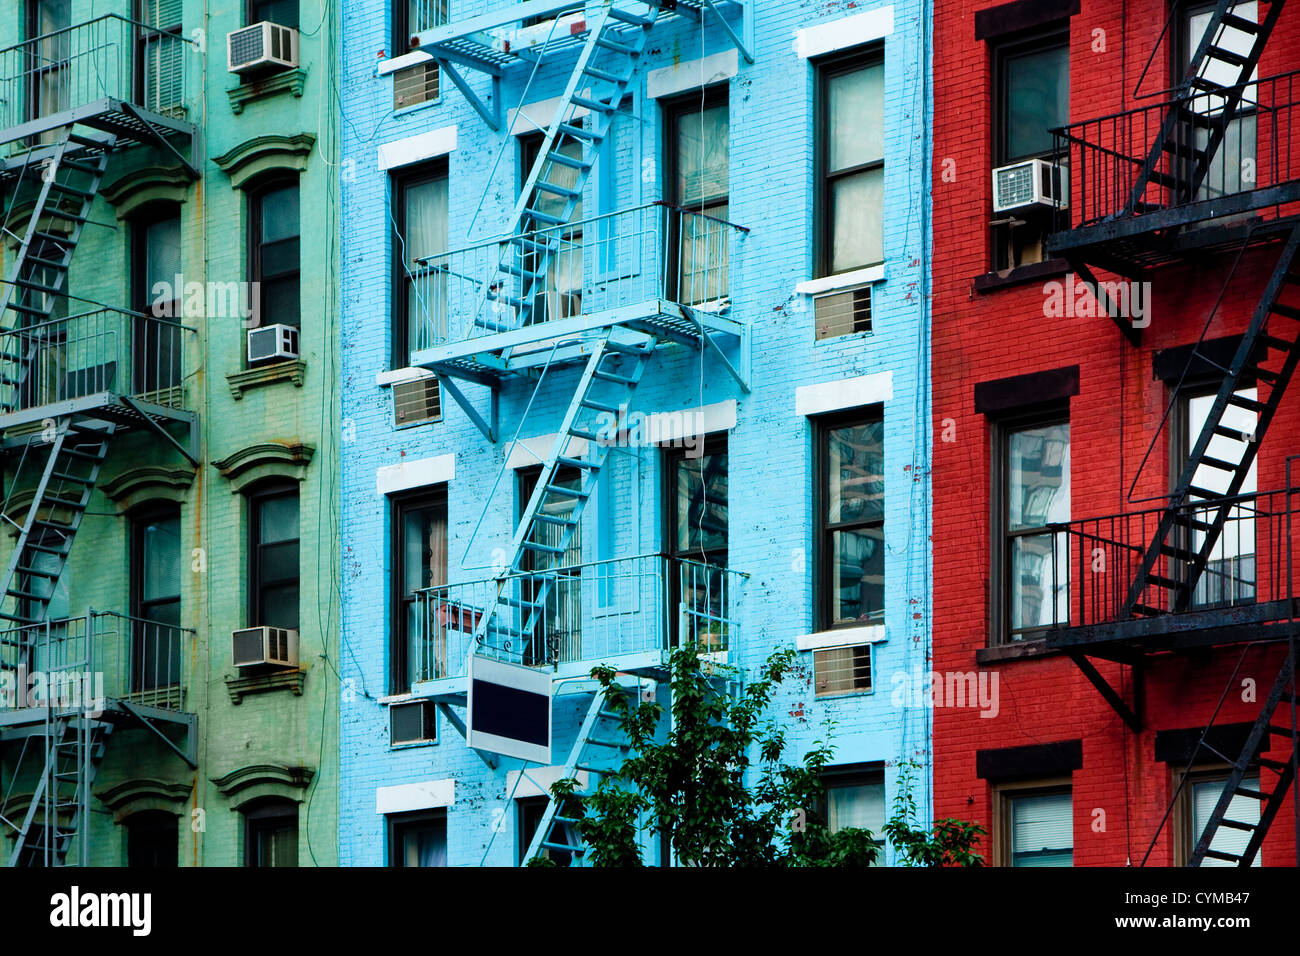 Colorful apartment buildings with fire escapes Stock Photo